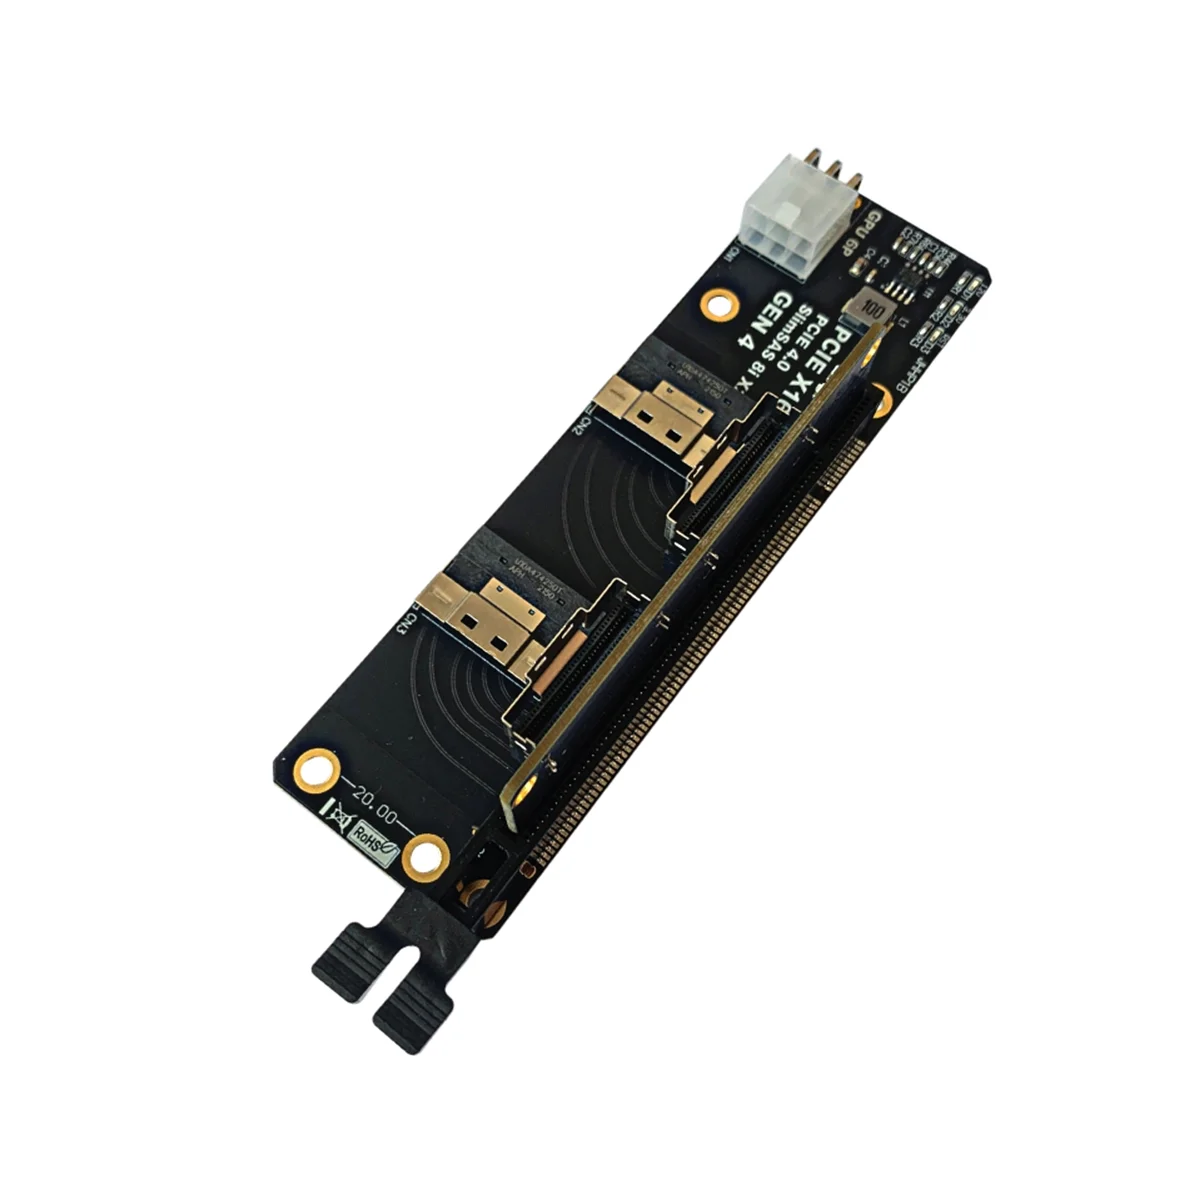 

Gen4 2 Ports SlimSAS 8I X2 To PCIE 4.0 X16 Slot Adapter Board for Network Card Graphics Video Card Capture Card